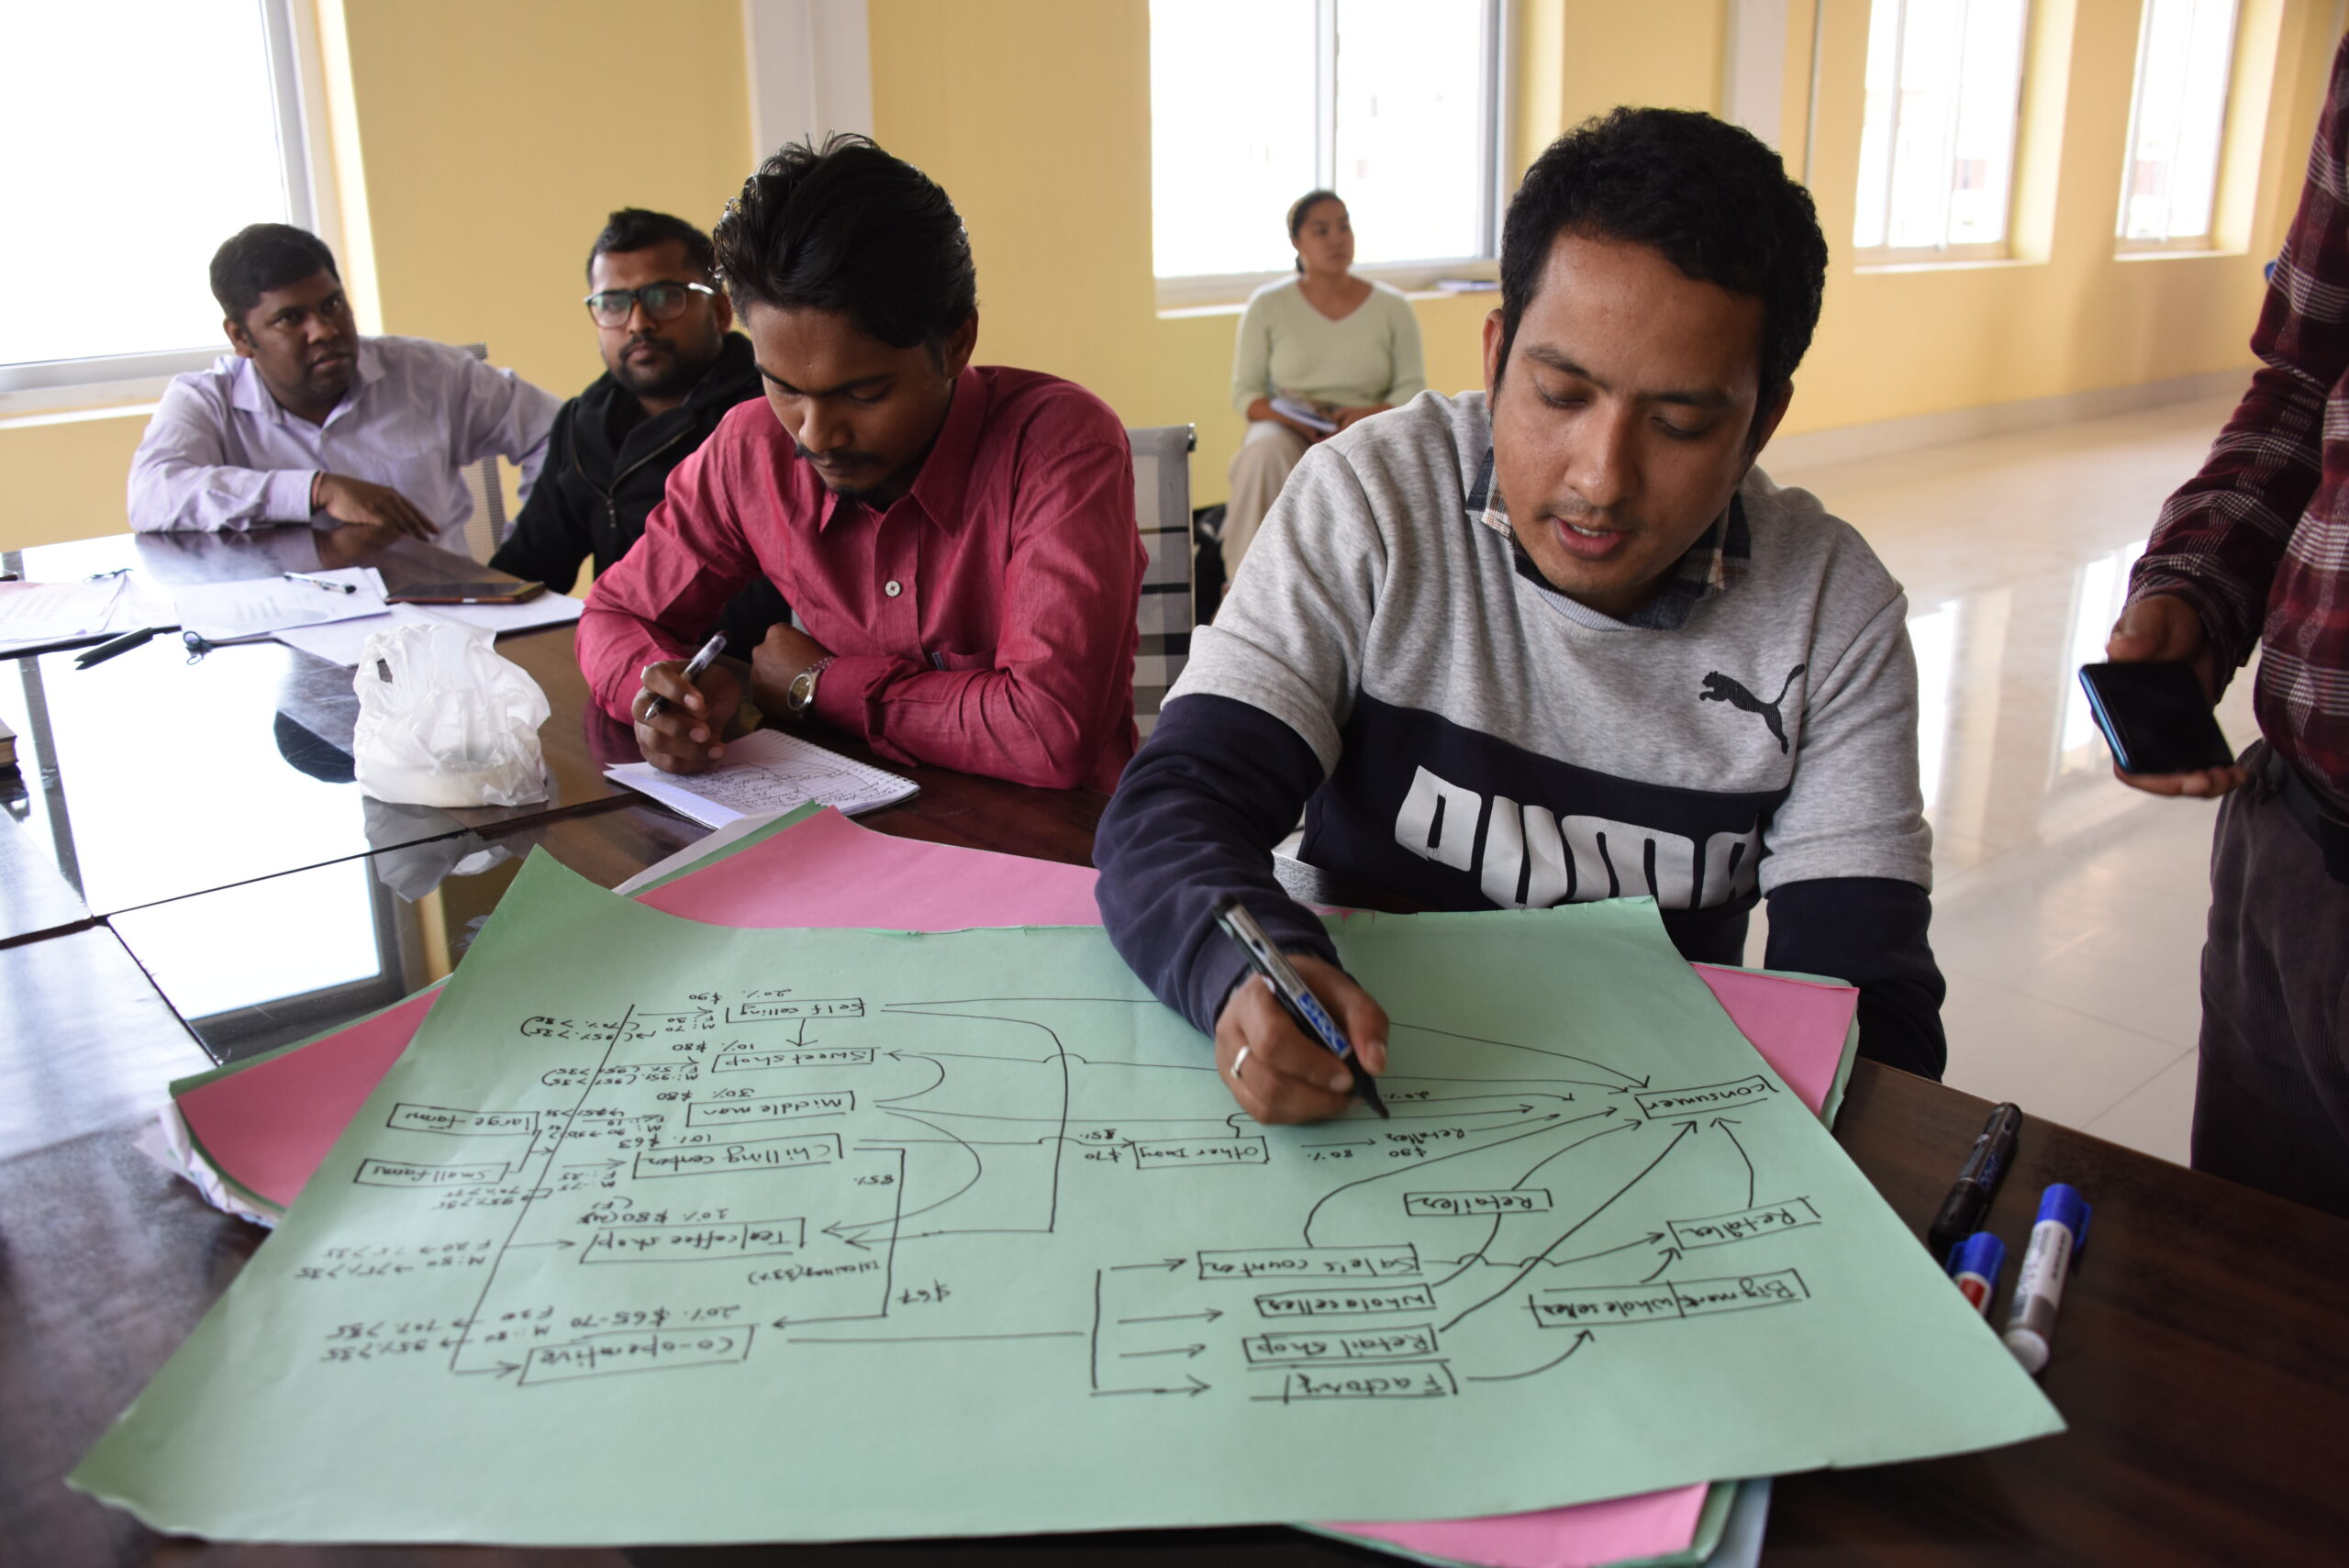 Dairy value chain mapping at the Itahari dairy cooperative in Nepal (ILRI / Nils Teufel) 